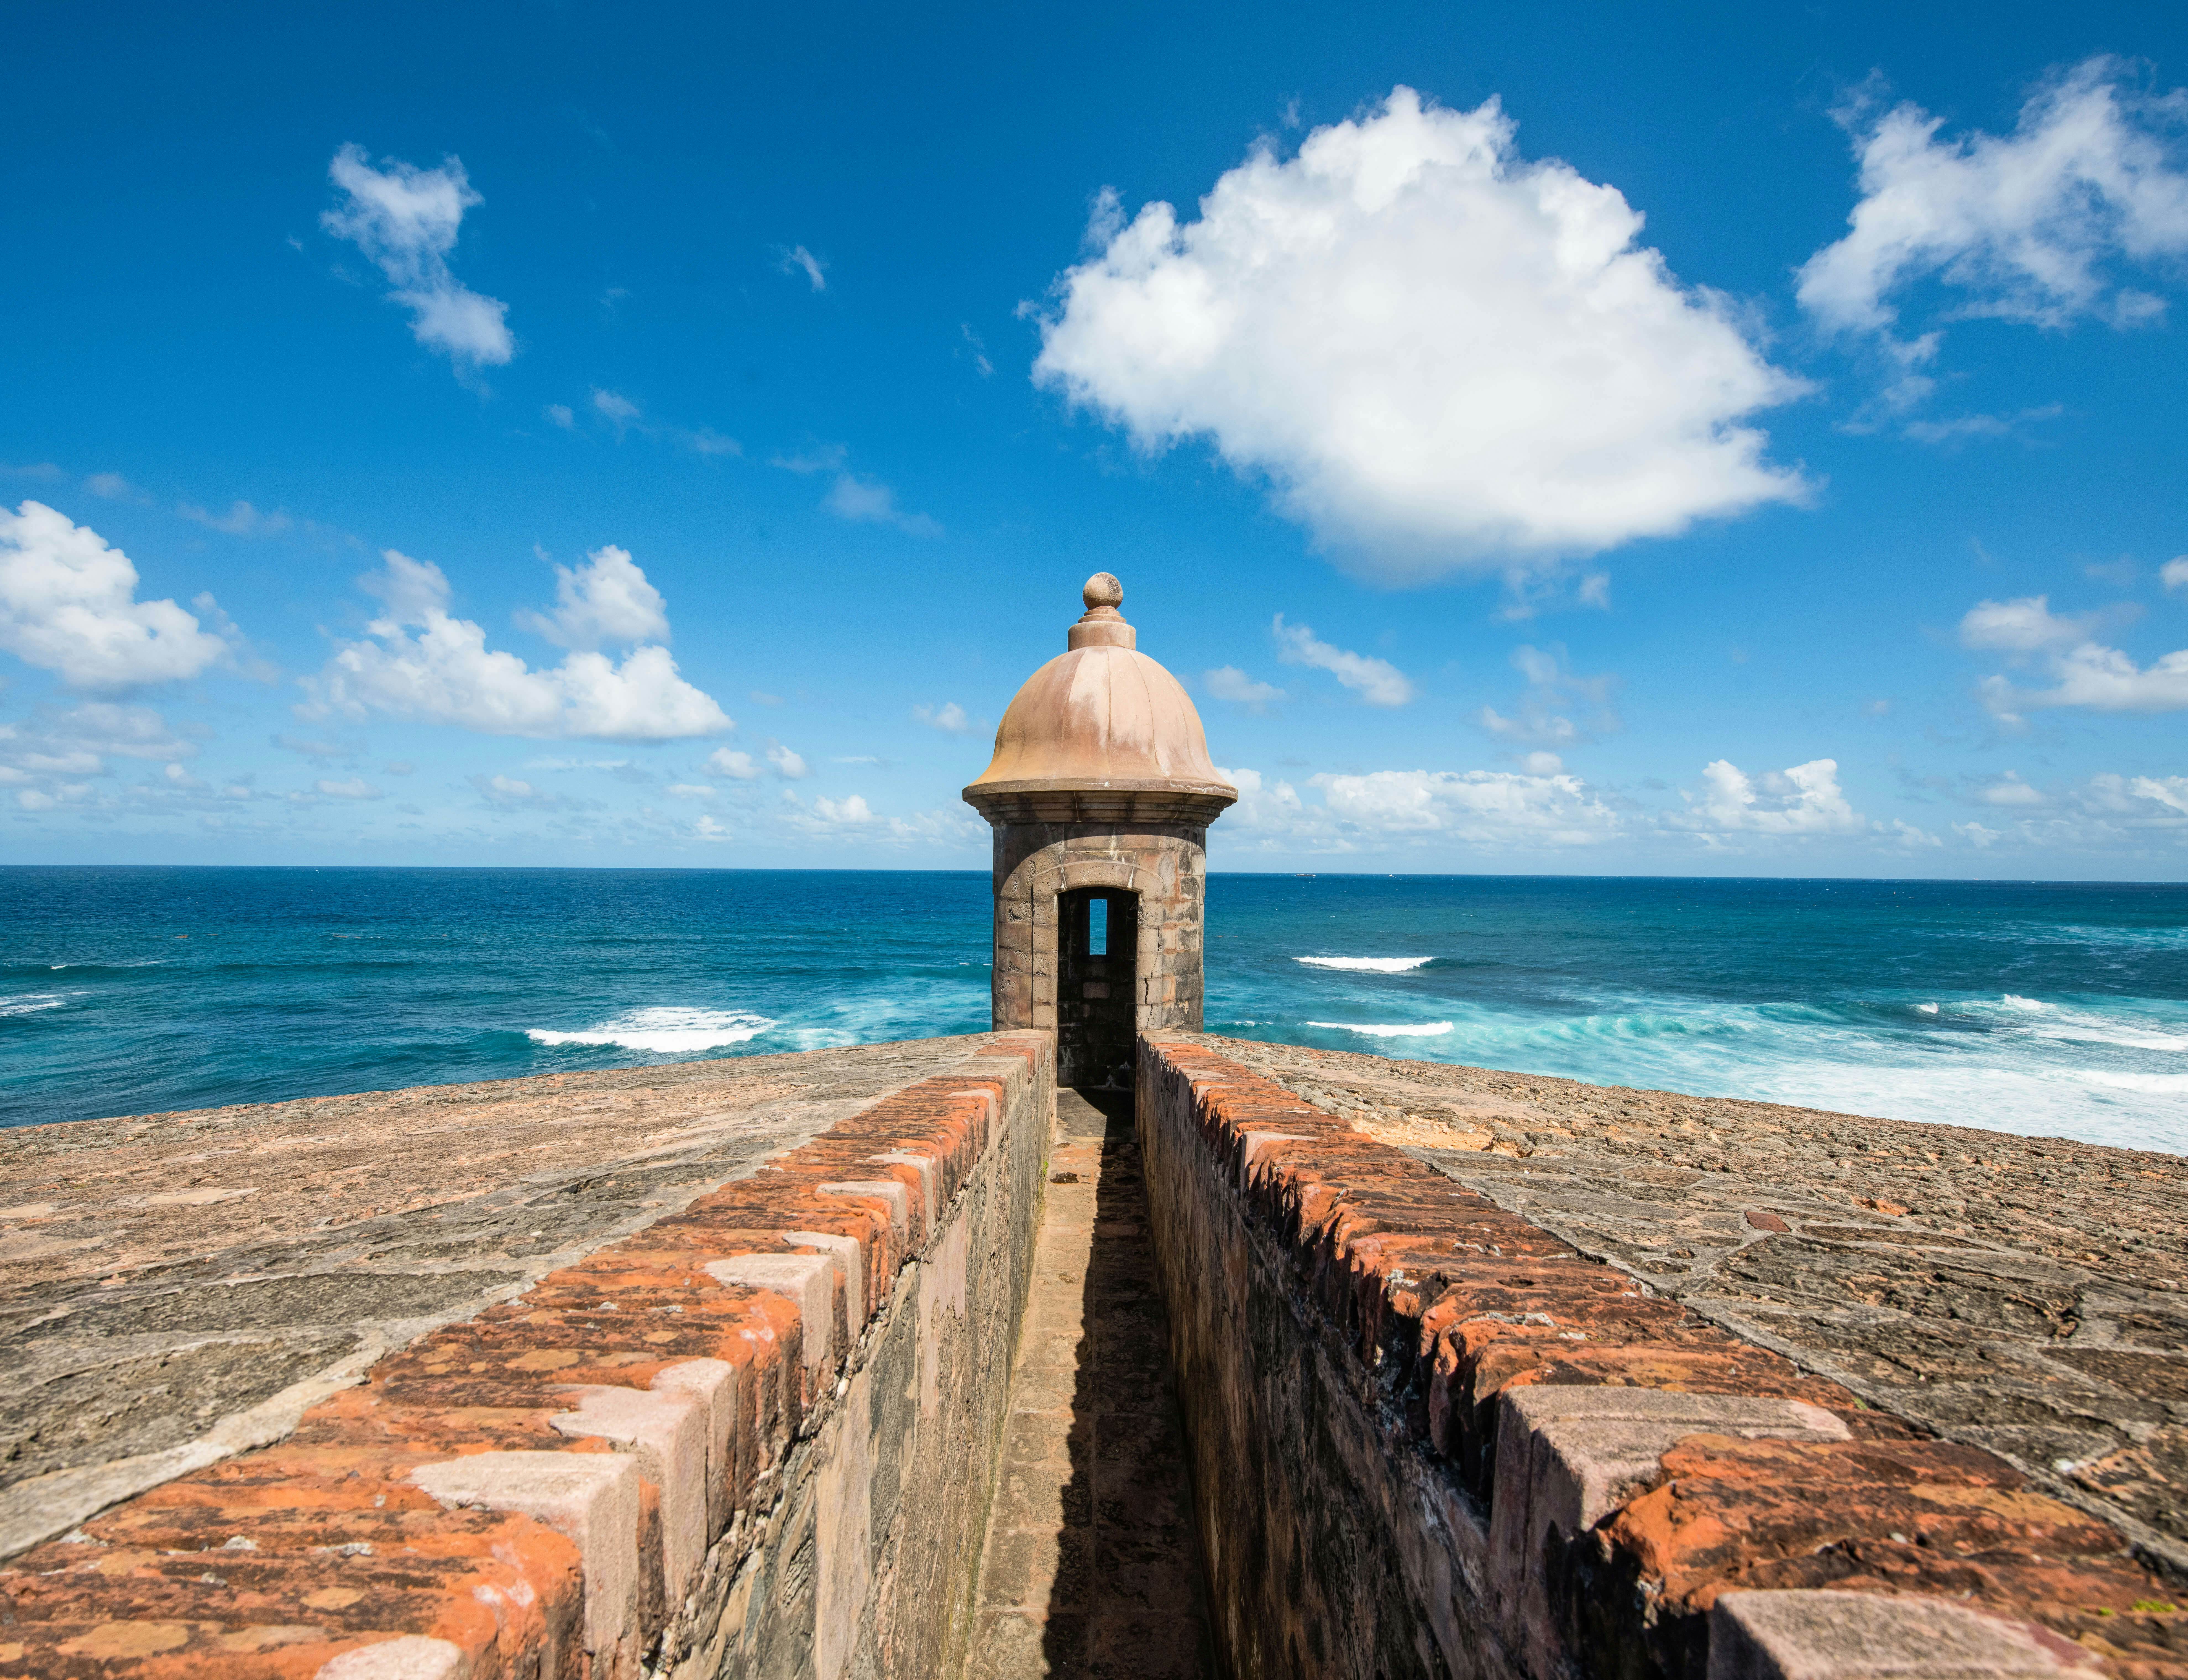 Puerto Rico Travel Guide 2024 - The Best of Puerto Rico & Islands